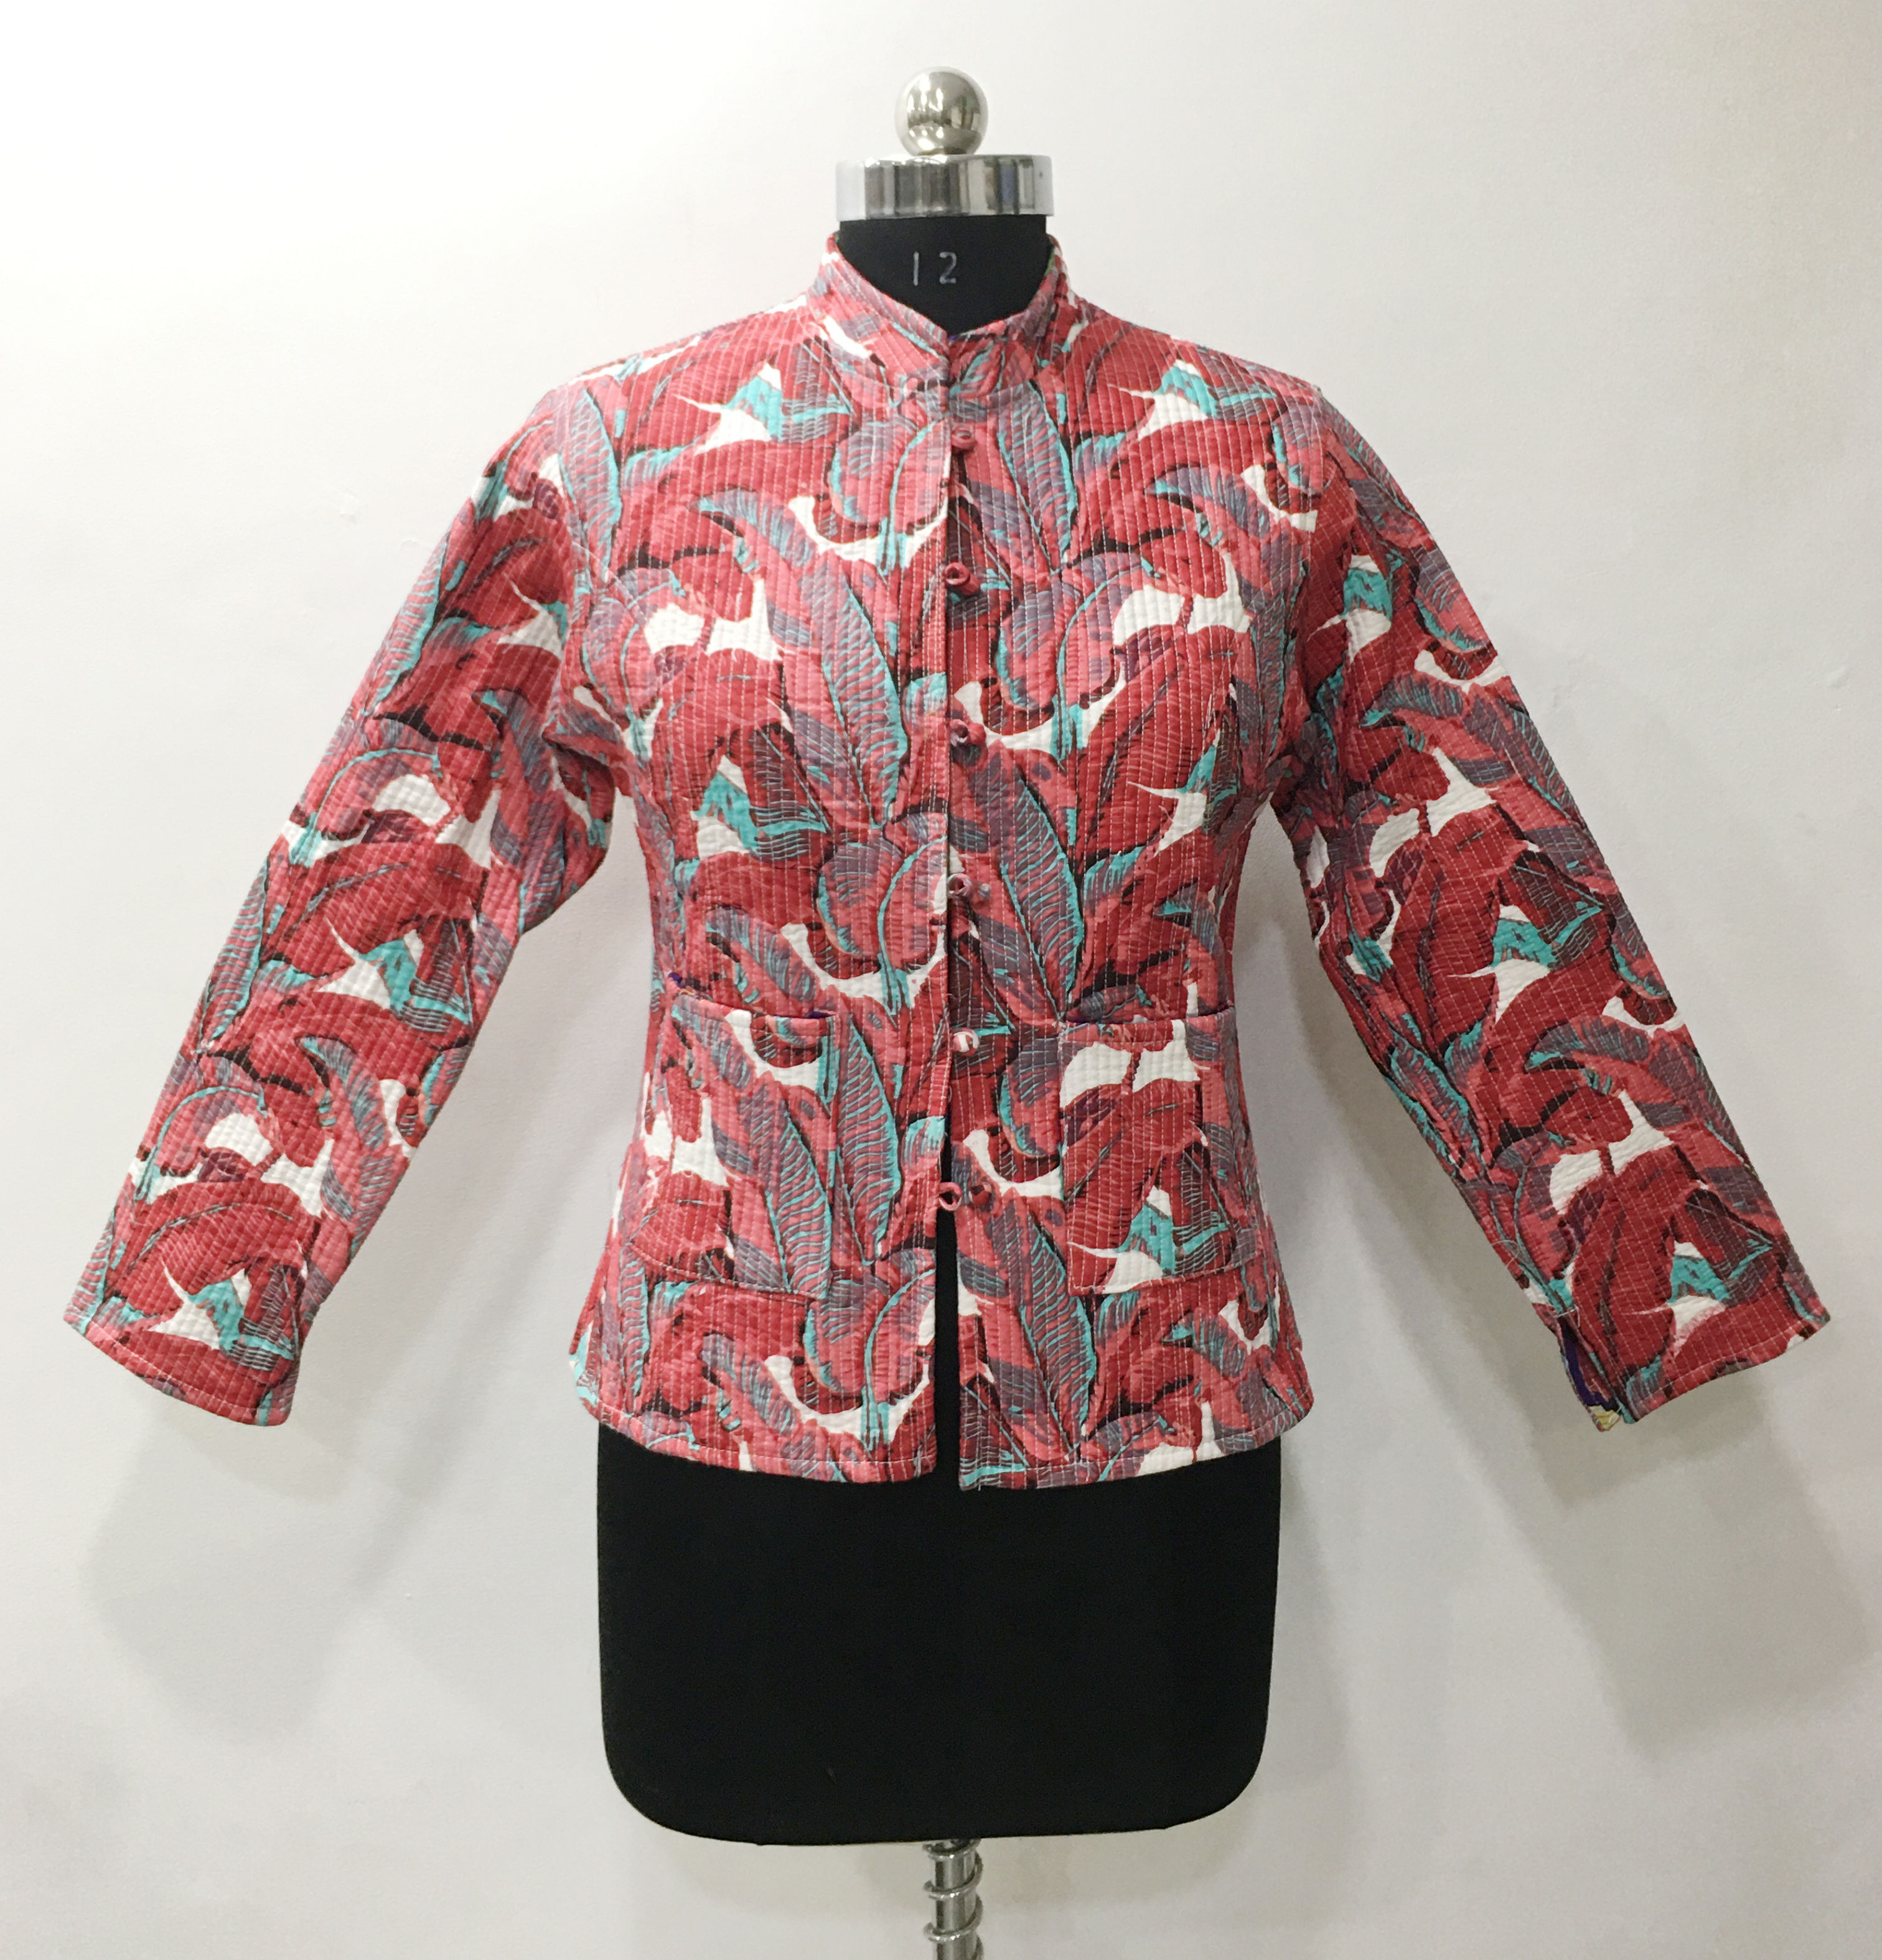 Machine Quilted Cotton Printed Jacket